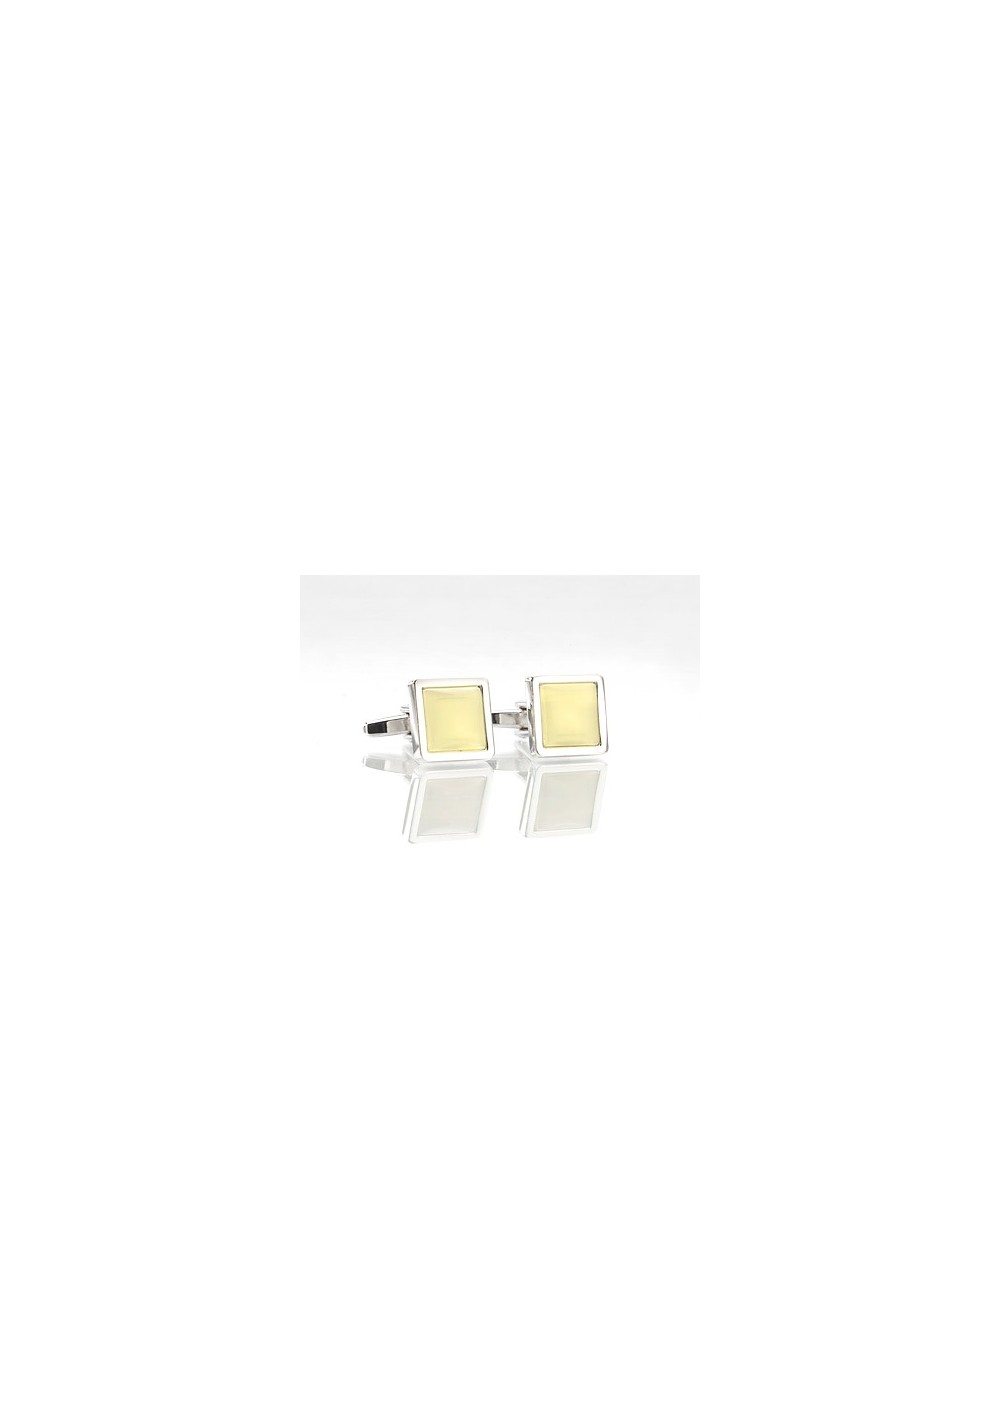 Yellow and Silver Cufflinks